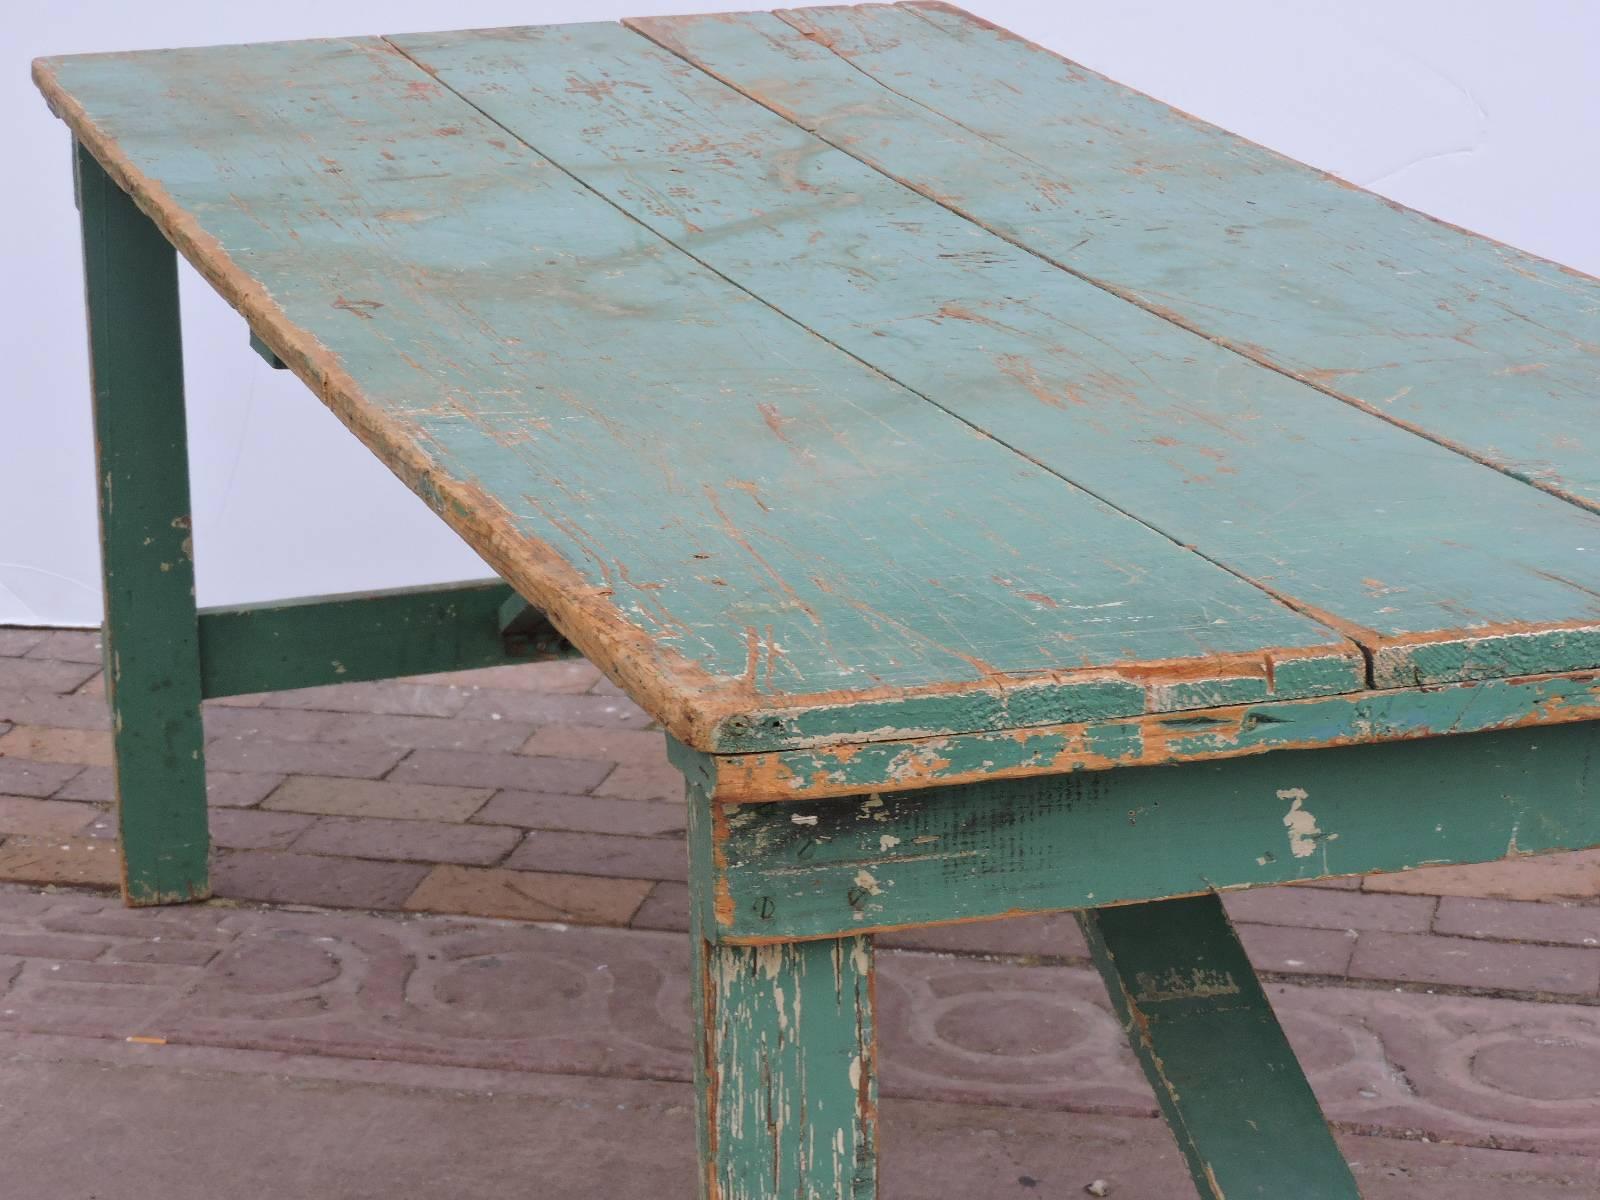 Antique collapsible folding leg farm harvest grange work dining table in beautifully aged old worn green painted surface. A very versatile design form that can be used inside outside all around the house / at the spur of the moment for any occasion